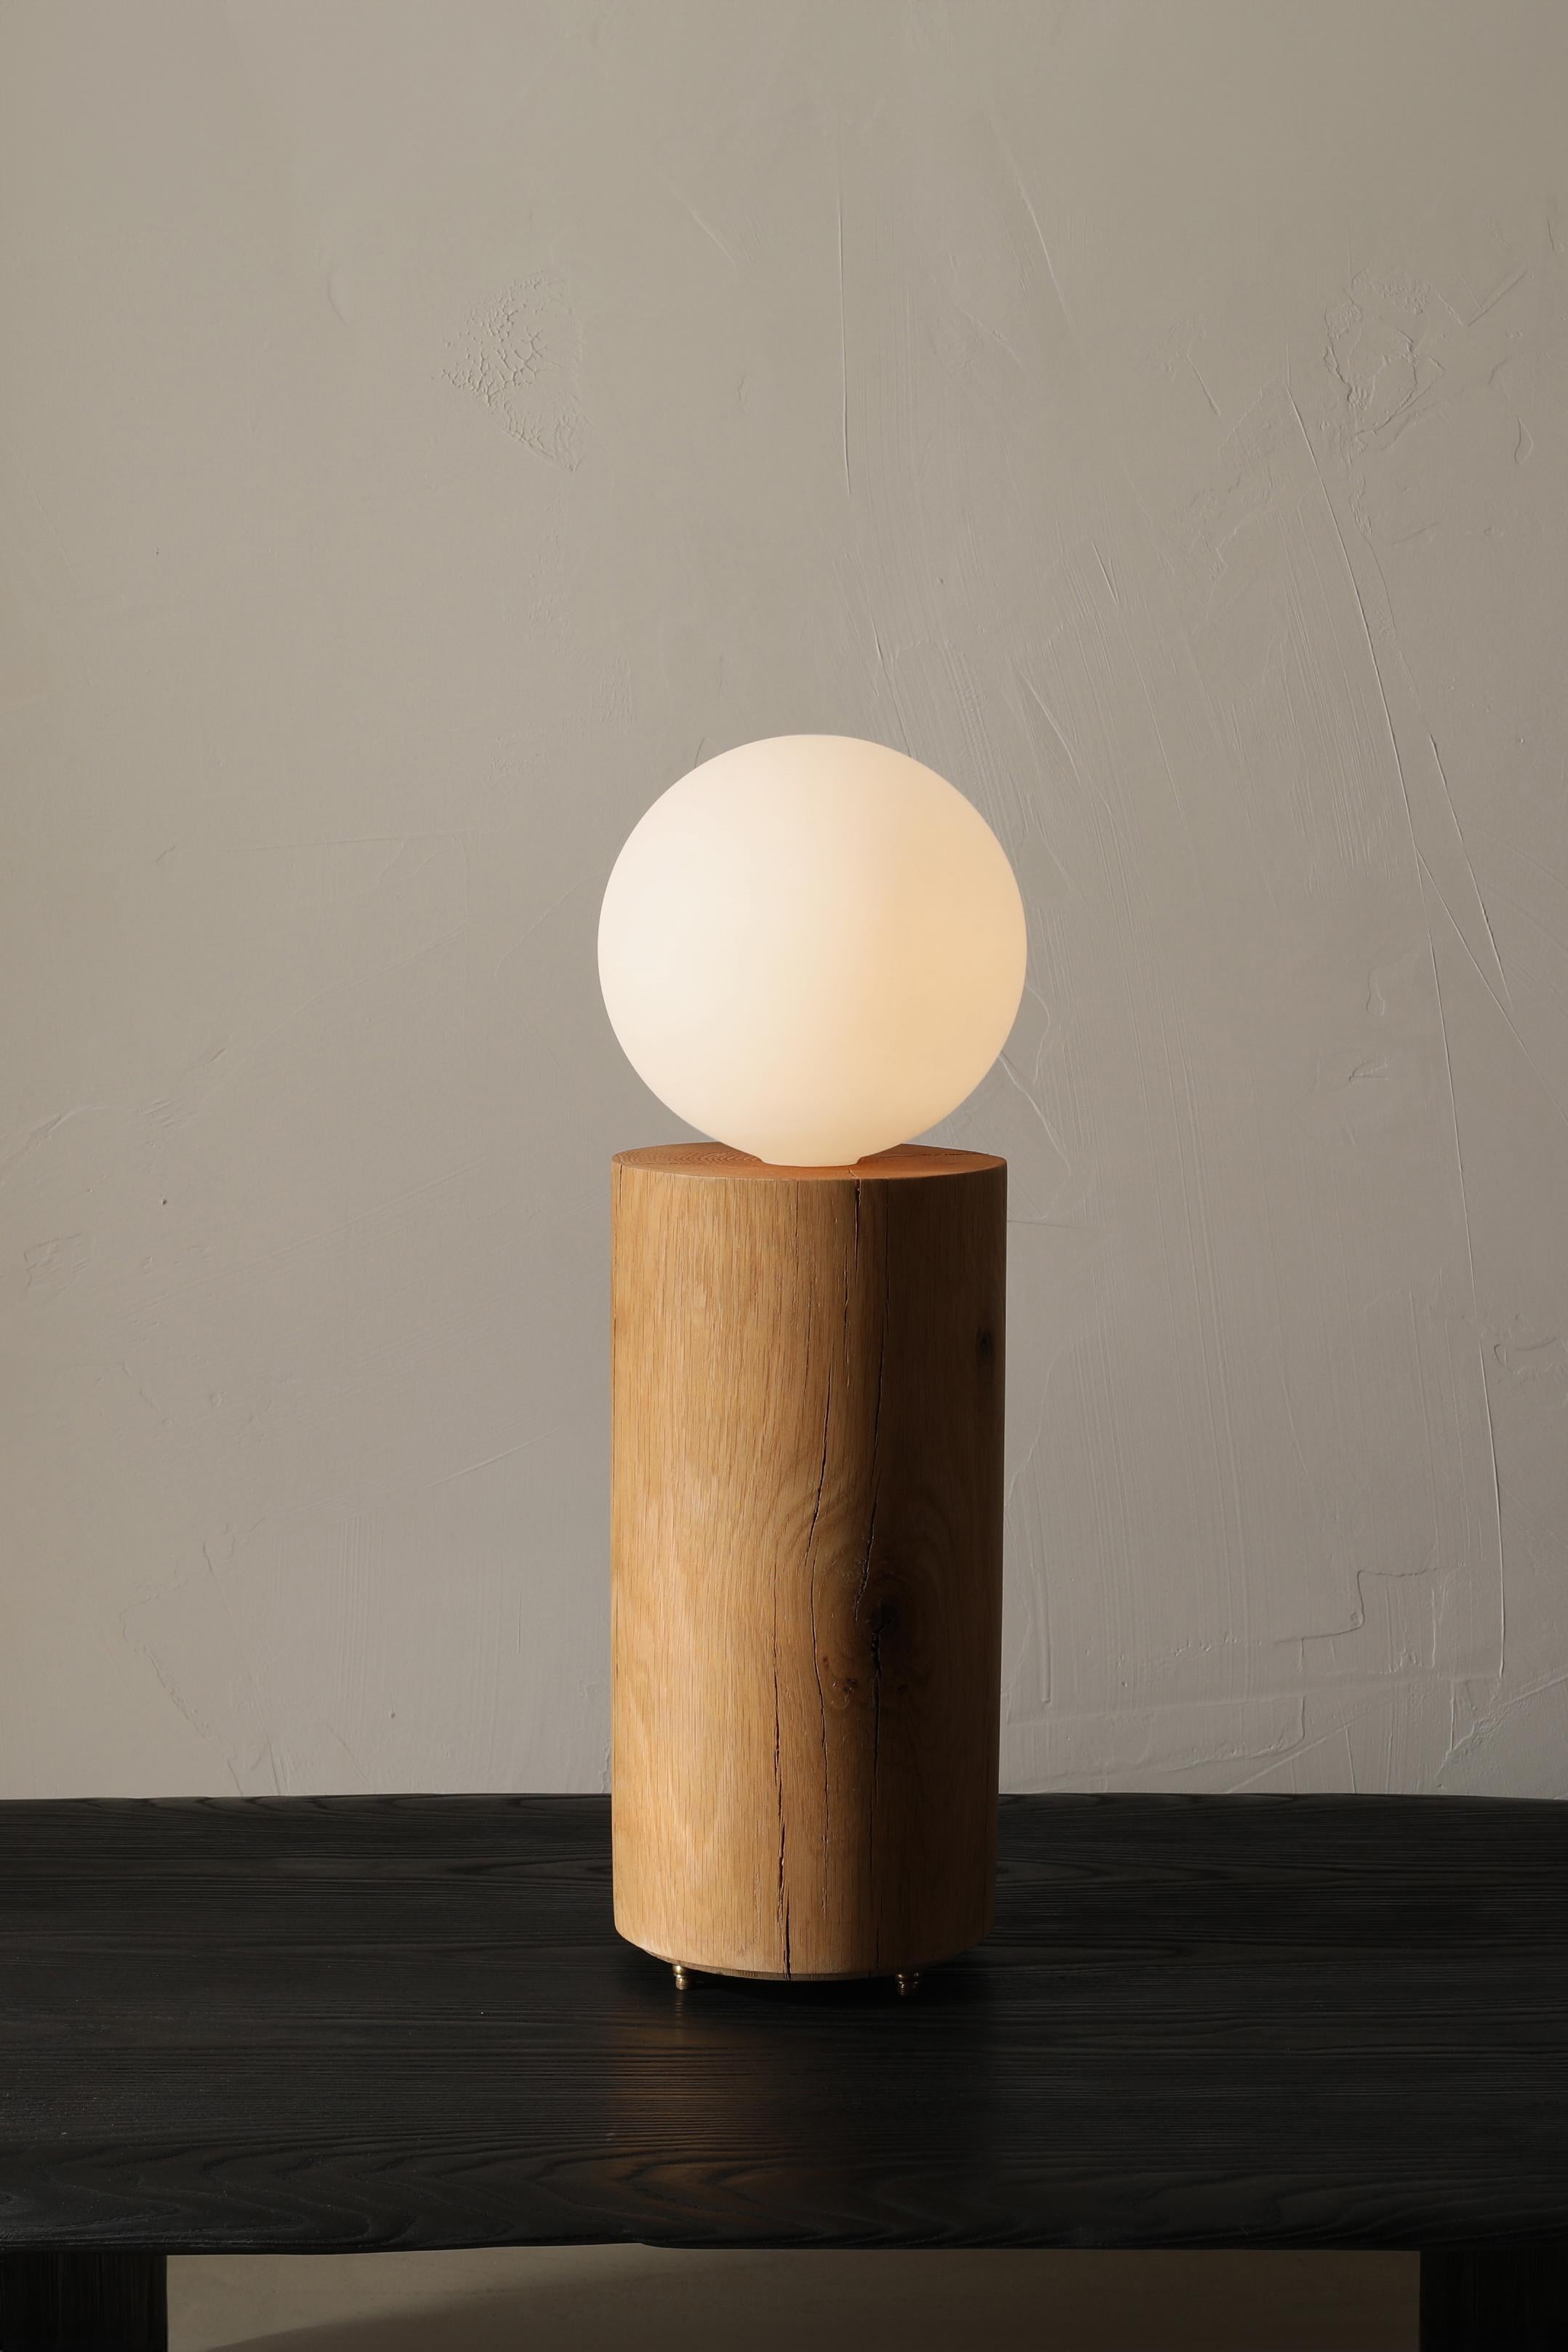 The Revolve Lamp is a solid oak table lamp with a large frosted globe bulb. The lamp sits on three bronze feet and is switched on the cord with a dimmer.

This piece comes from the Revolve collection - Graphic forms of this pedestal-based collection